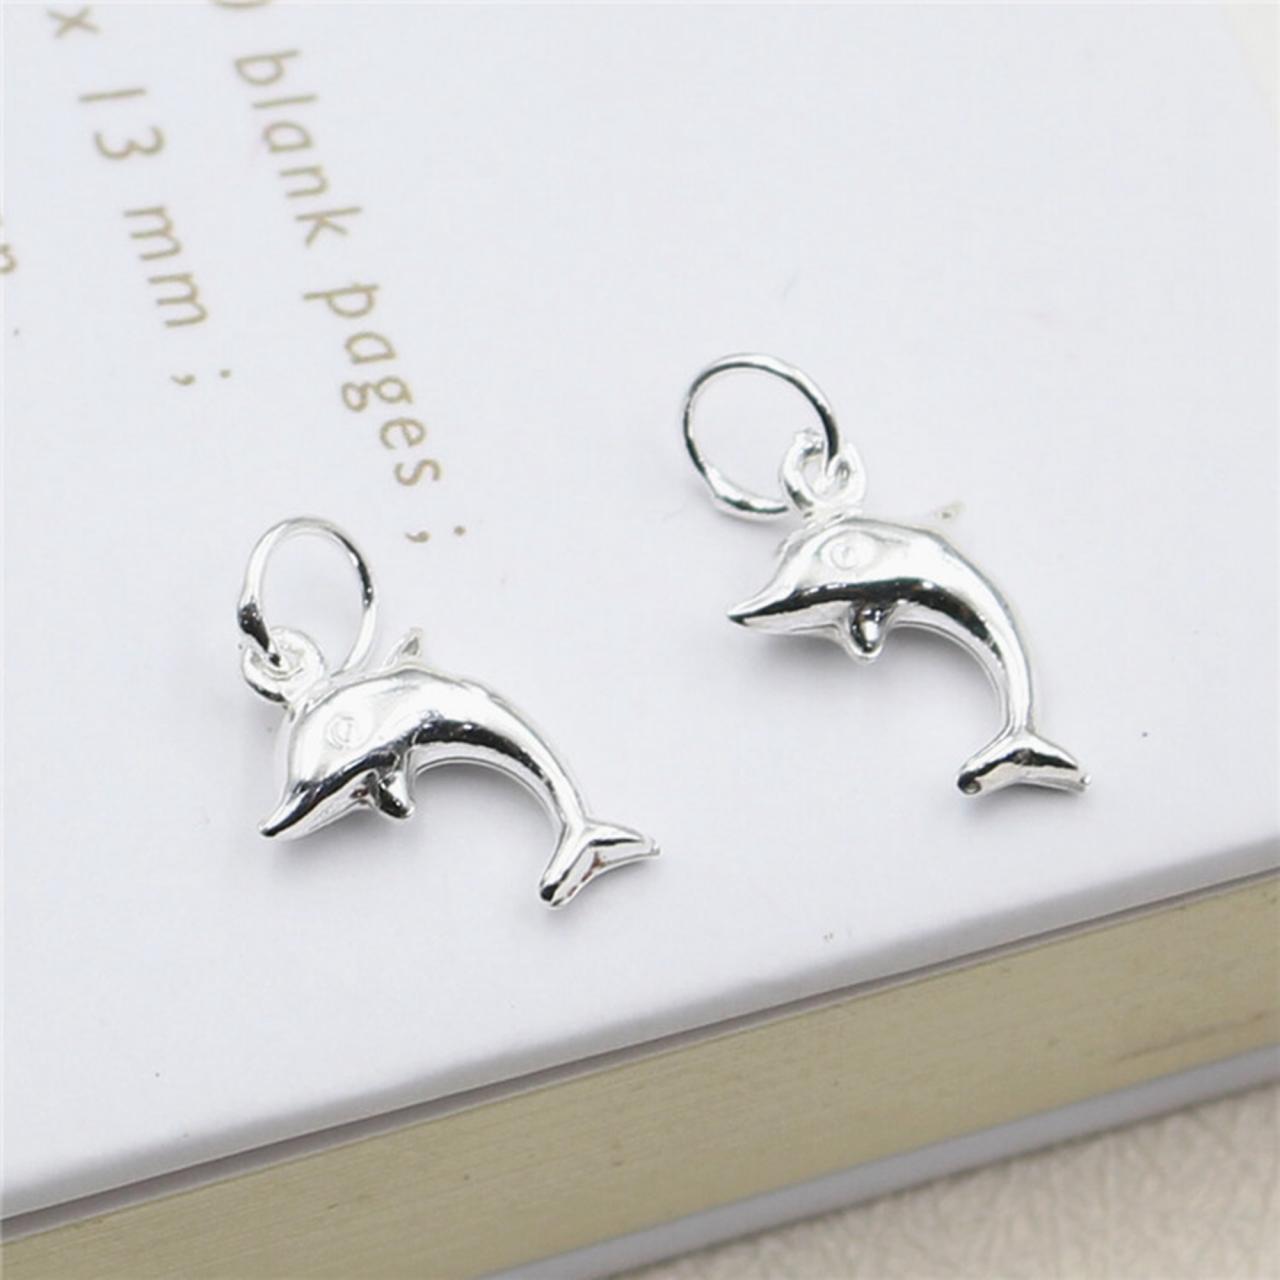 4pcs Sterling Silver Dolphin Charm, Silver Dolphin Charm, Necklace Charm, Bracelet Charm, Earring Charm, Animals Charm, Tiny Charm, Small Charm